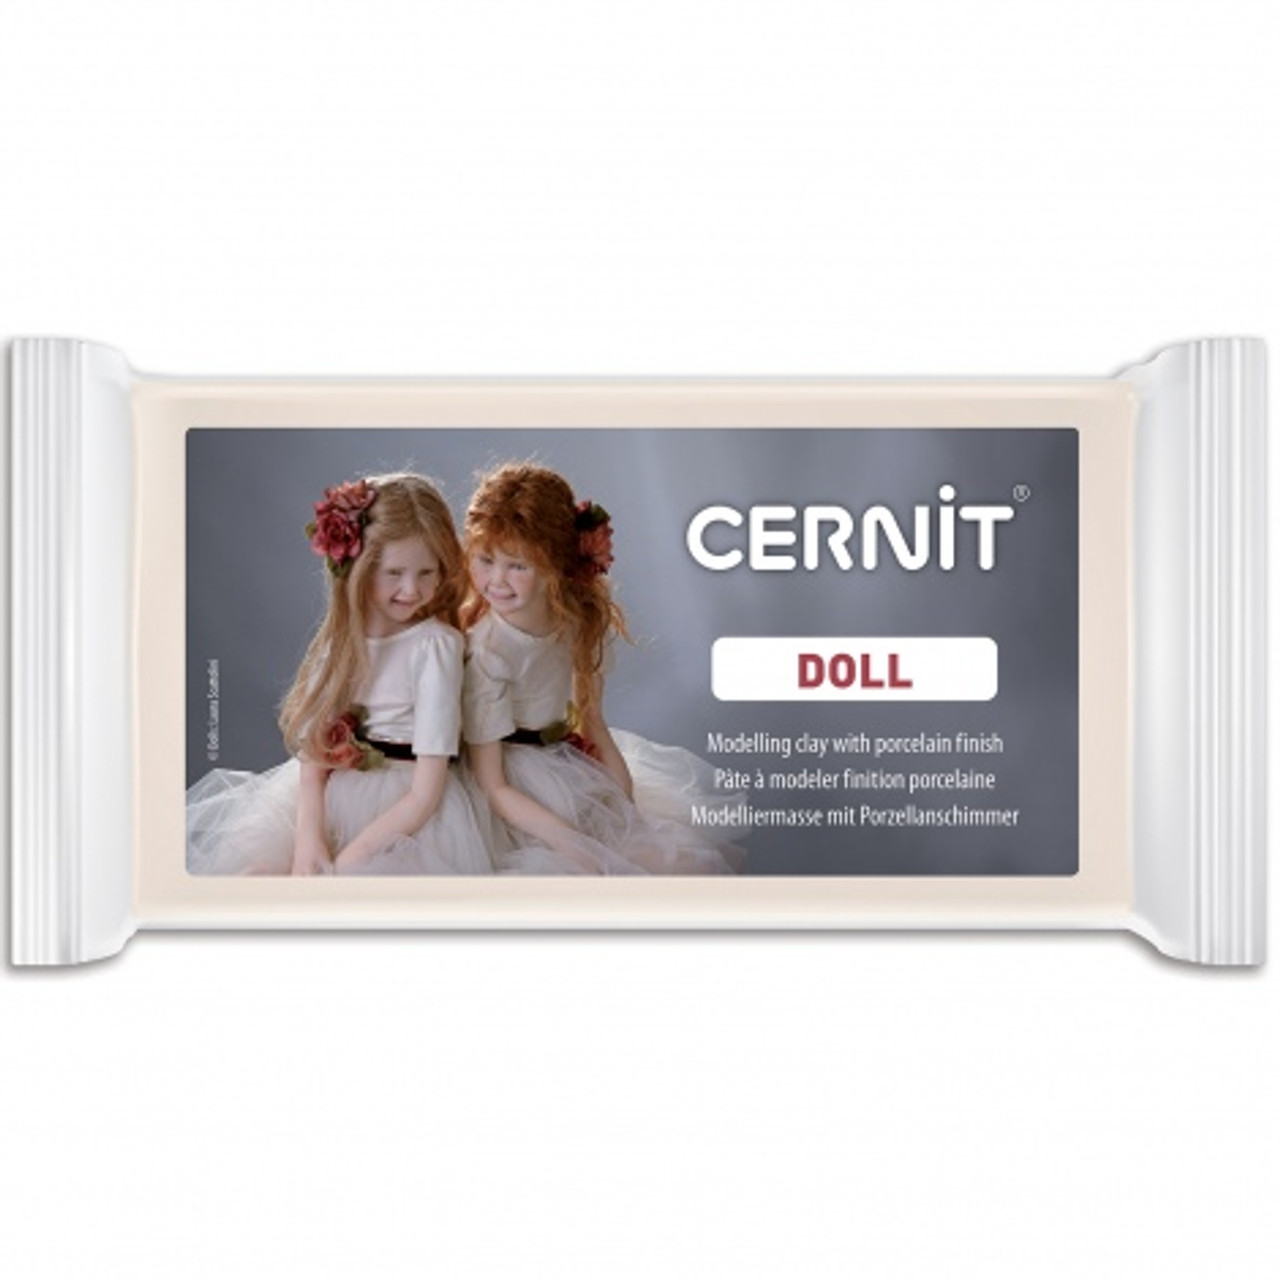 Super Sculpey Living Doll Clay 1 lb available in 3 colors - Poly